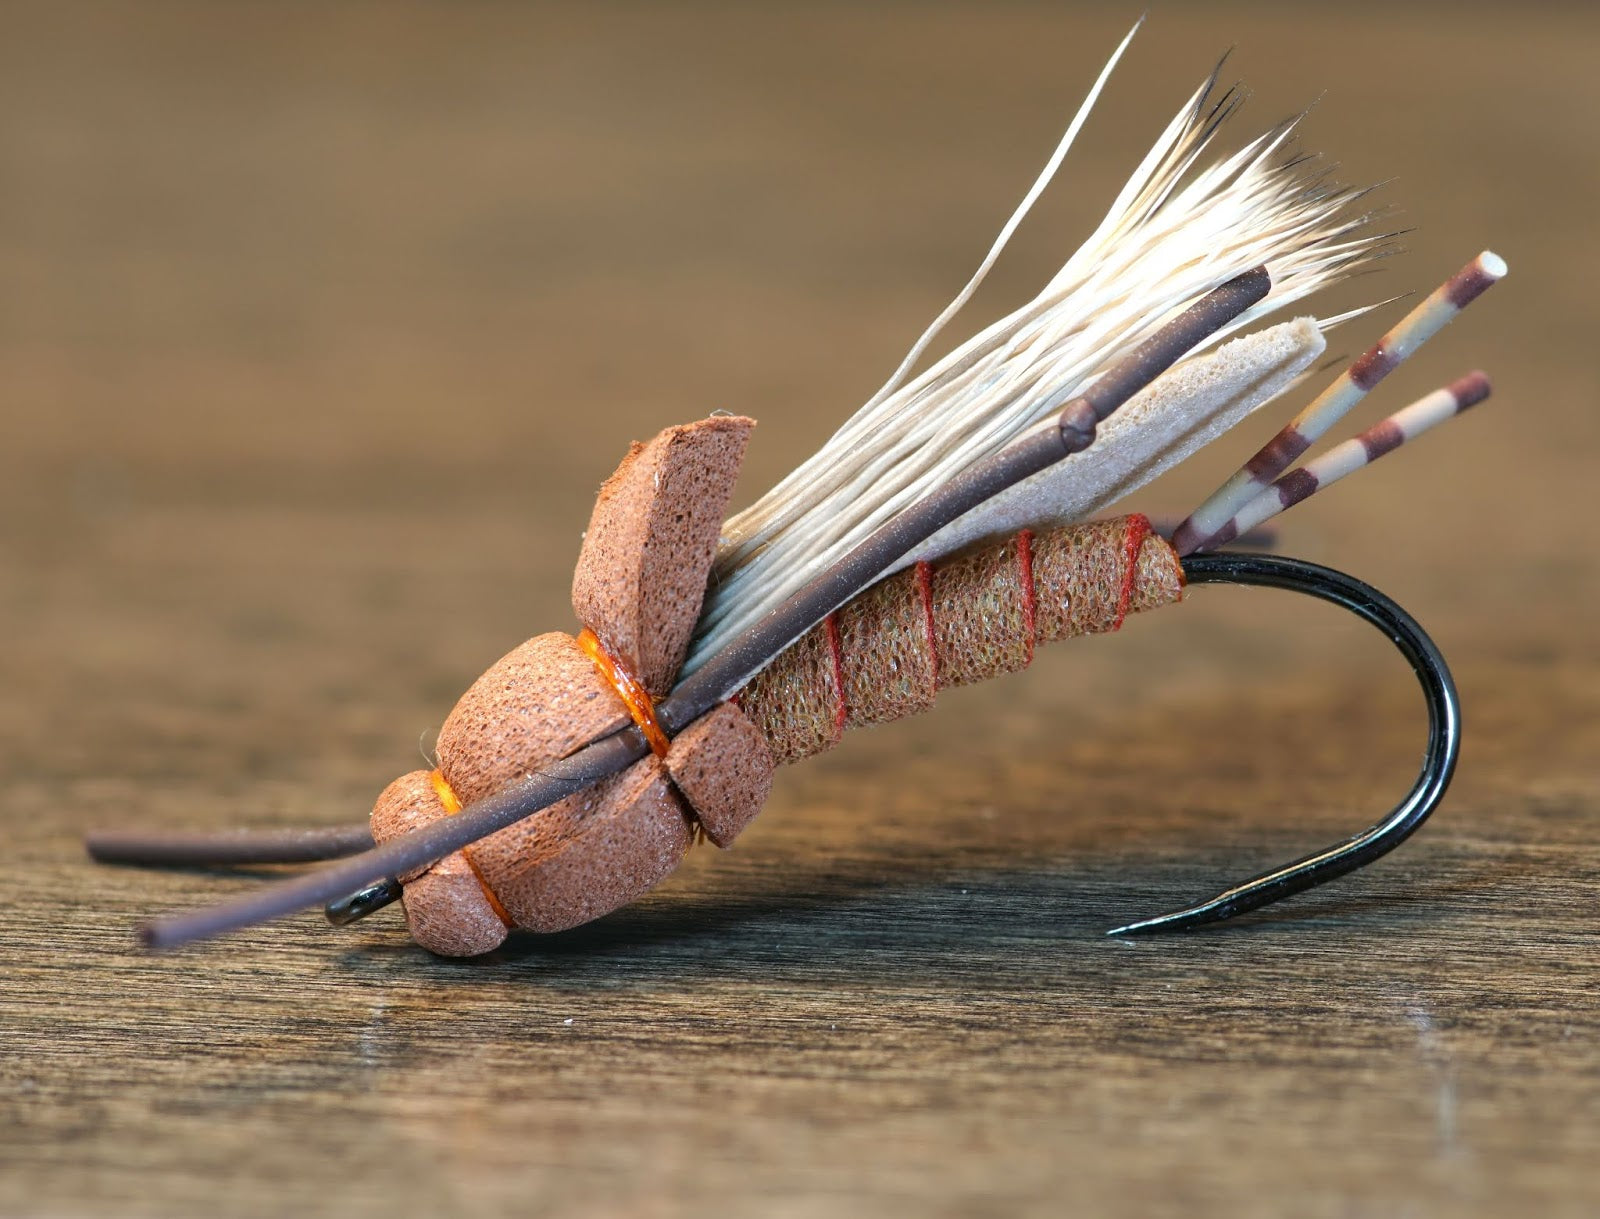 Foam is Home Stonefly – Fly Fish Food